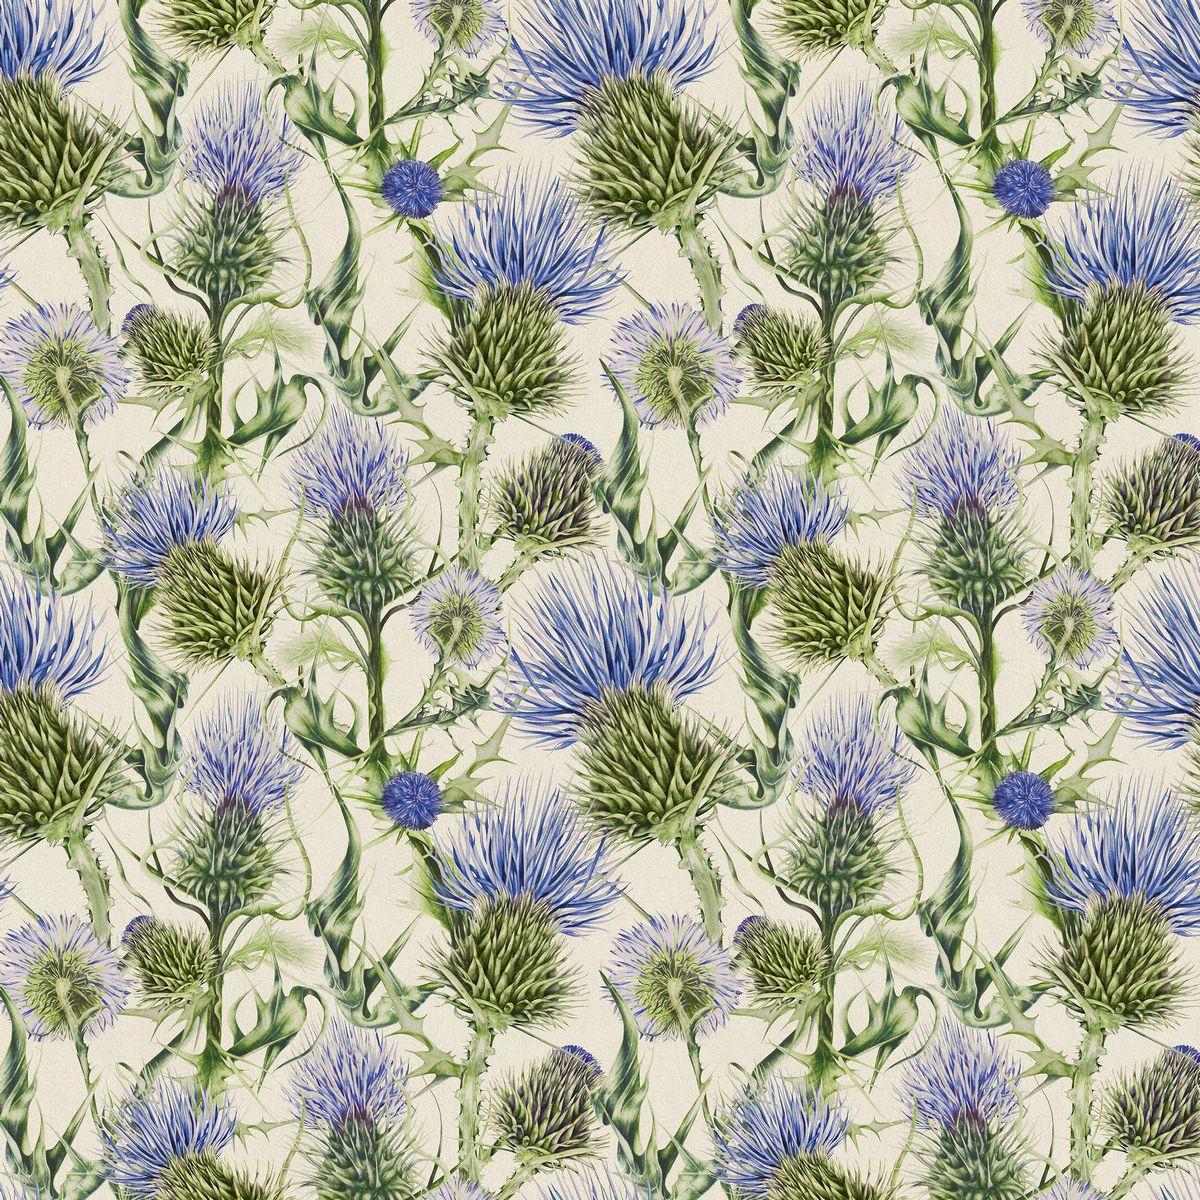 Penton Bluebell Linen Fabric by Voyage Maison